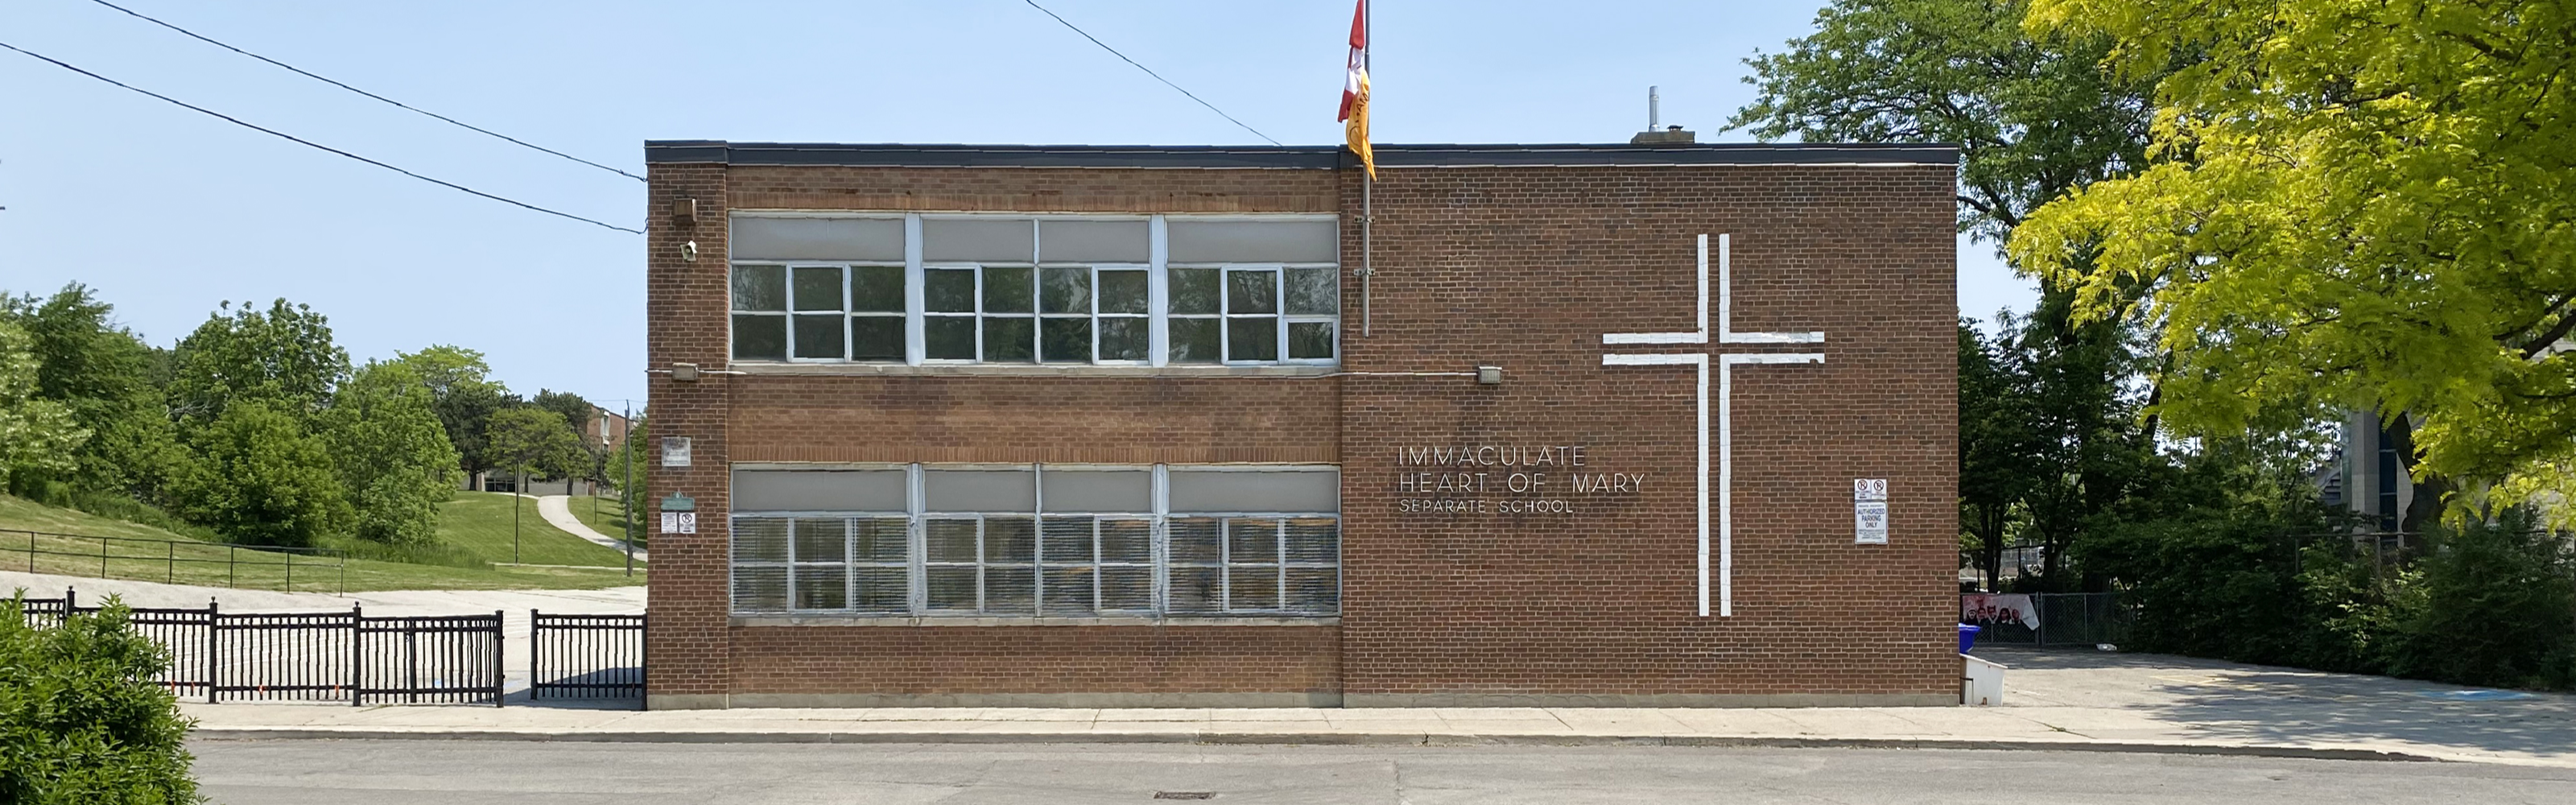 The front of the Immaculate Heart of Mary Catholic School building